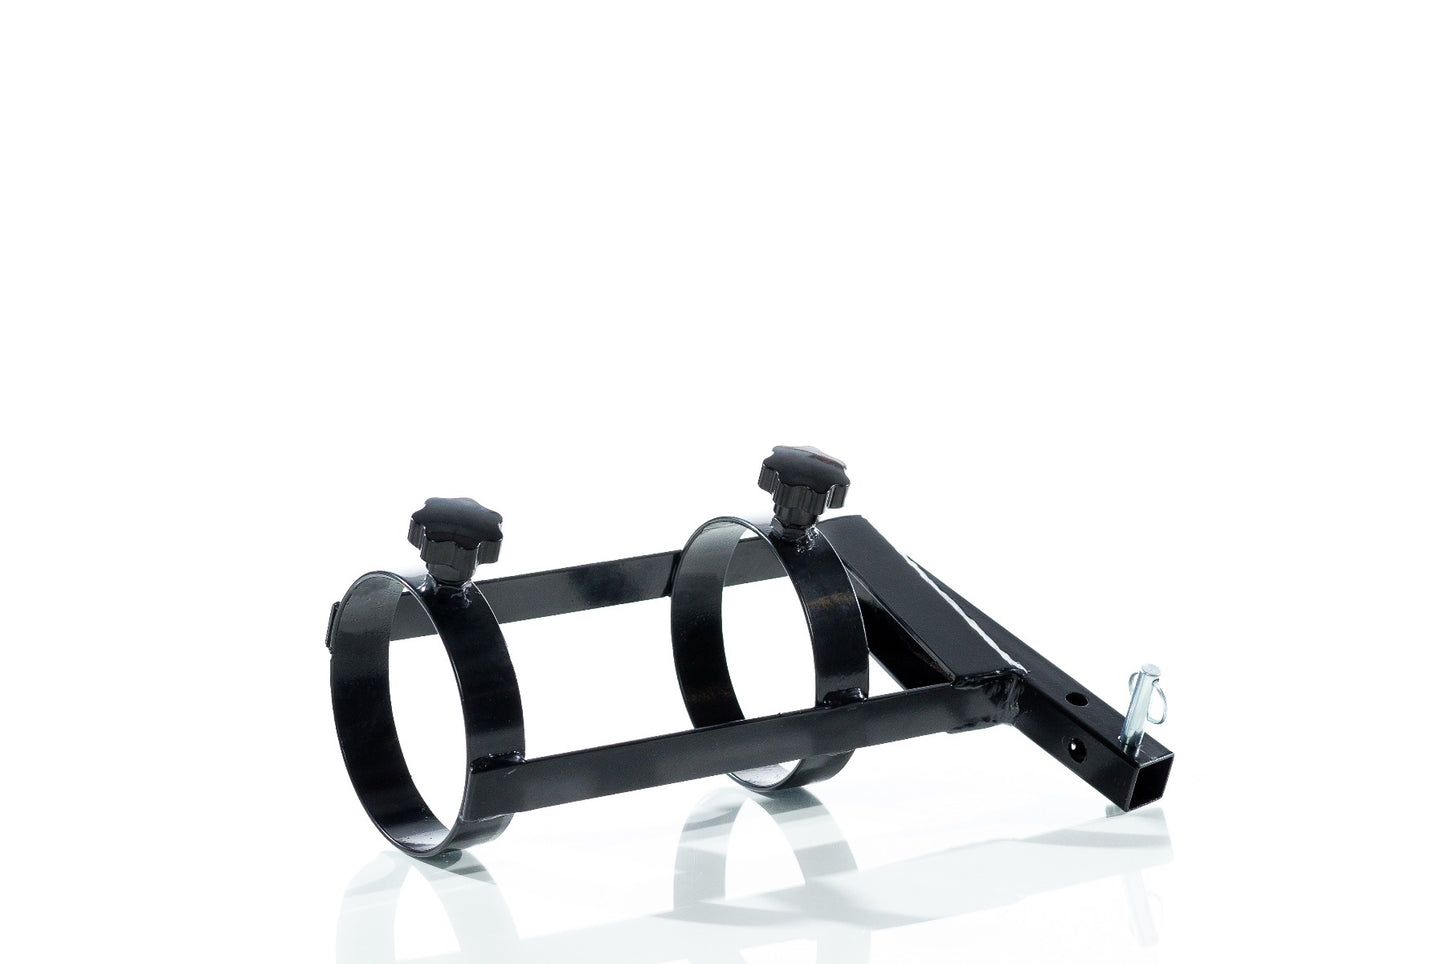 Oxygen O2 Holder Cylinder Tank Metal Bracket Accessory for Most Mobility Scooters and Power Chairs